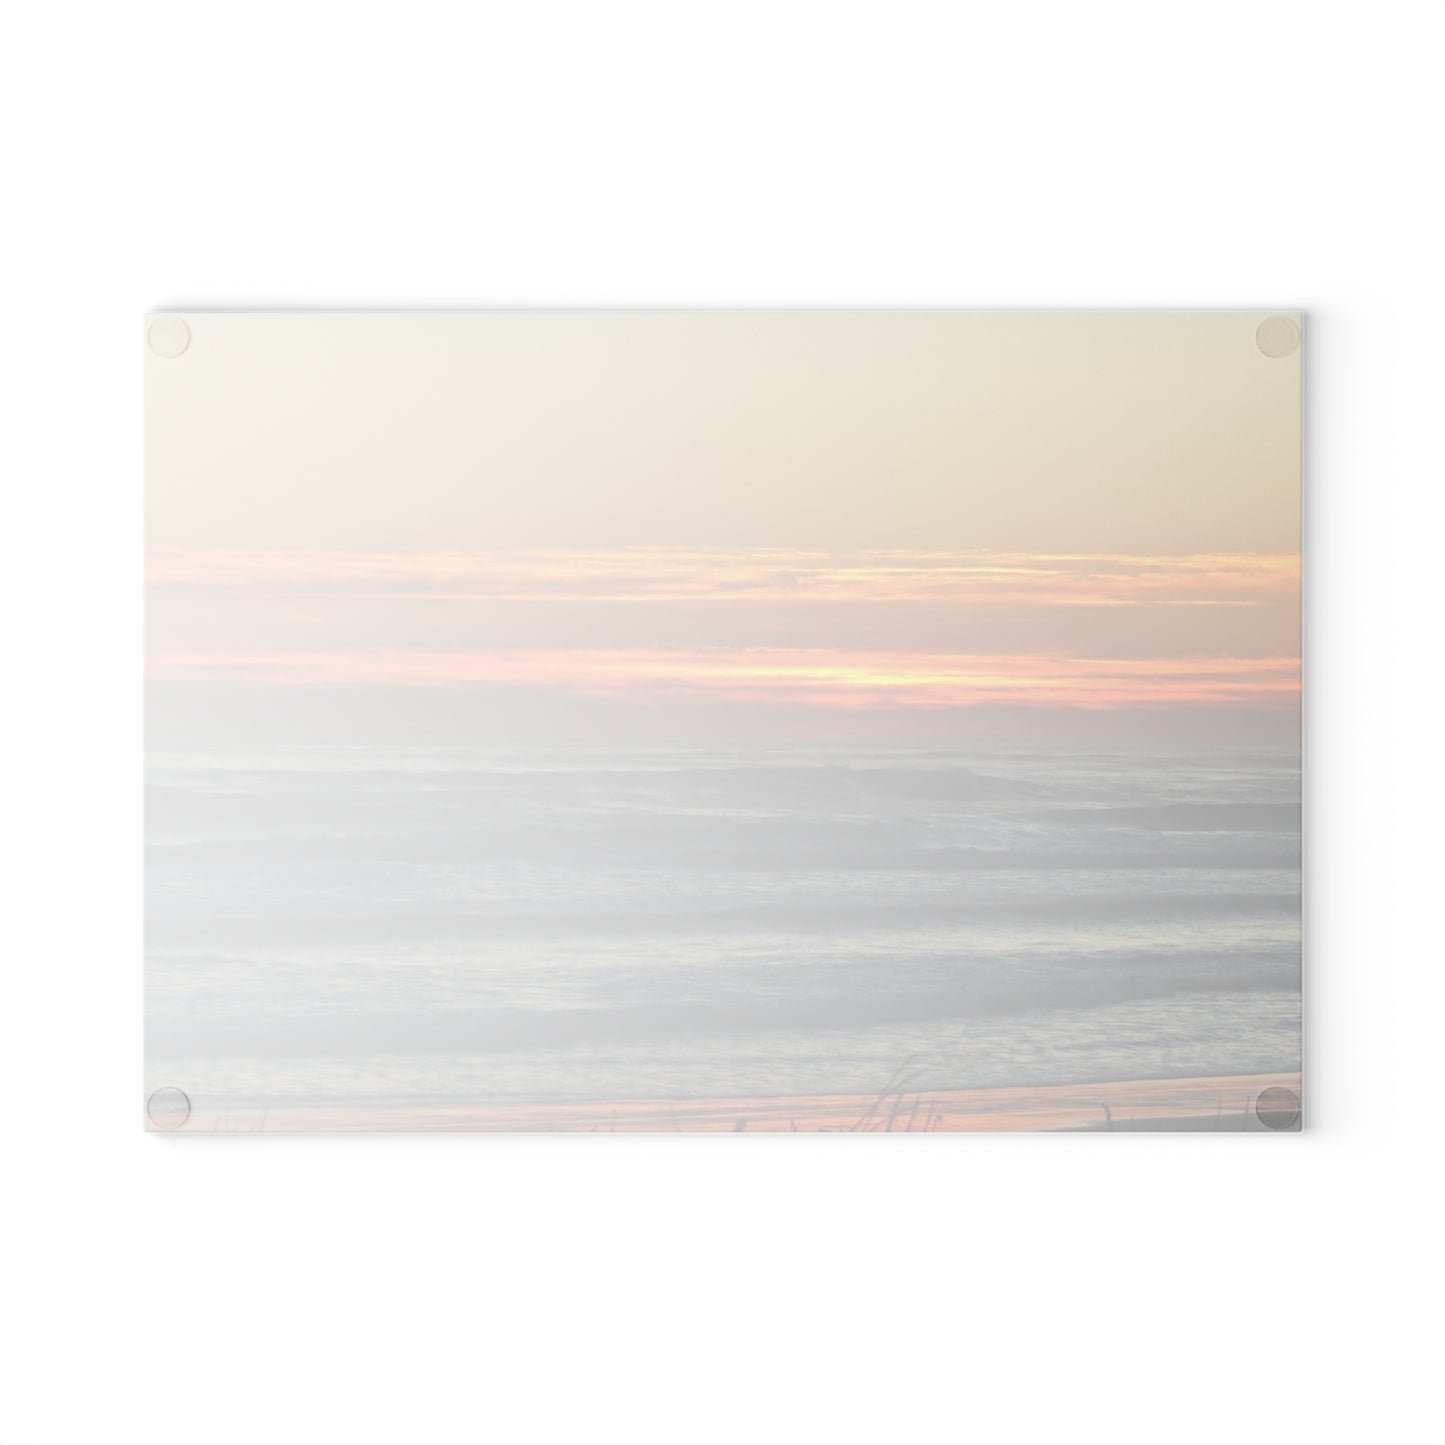 Glass Cutting Board: 2 sizes; Textured surface; Seascape